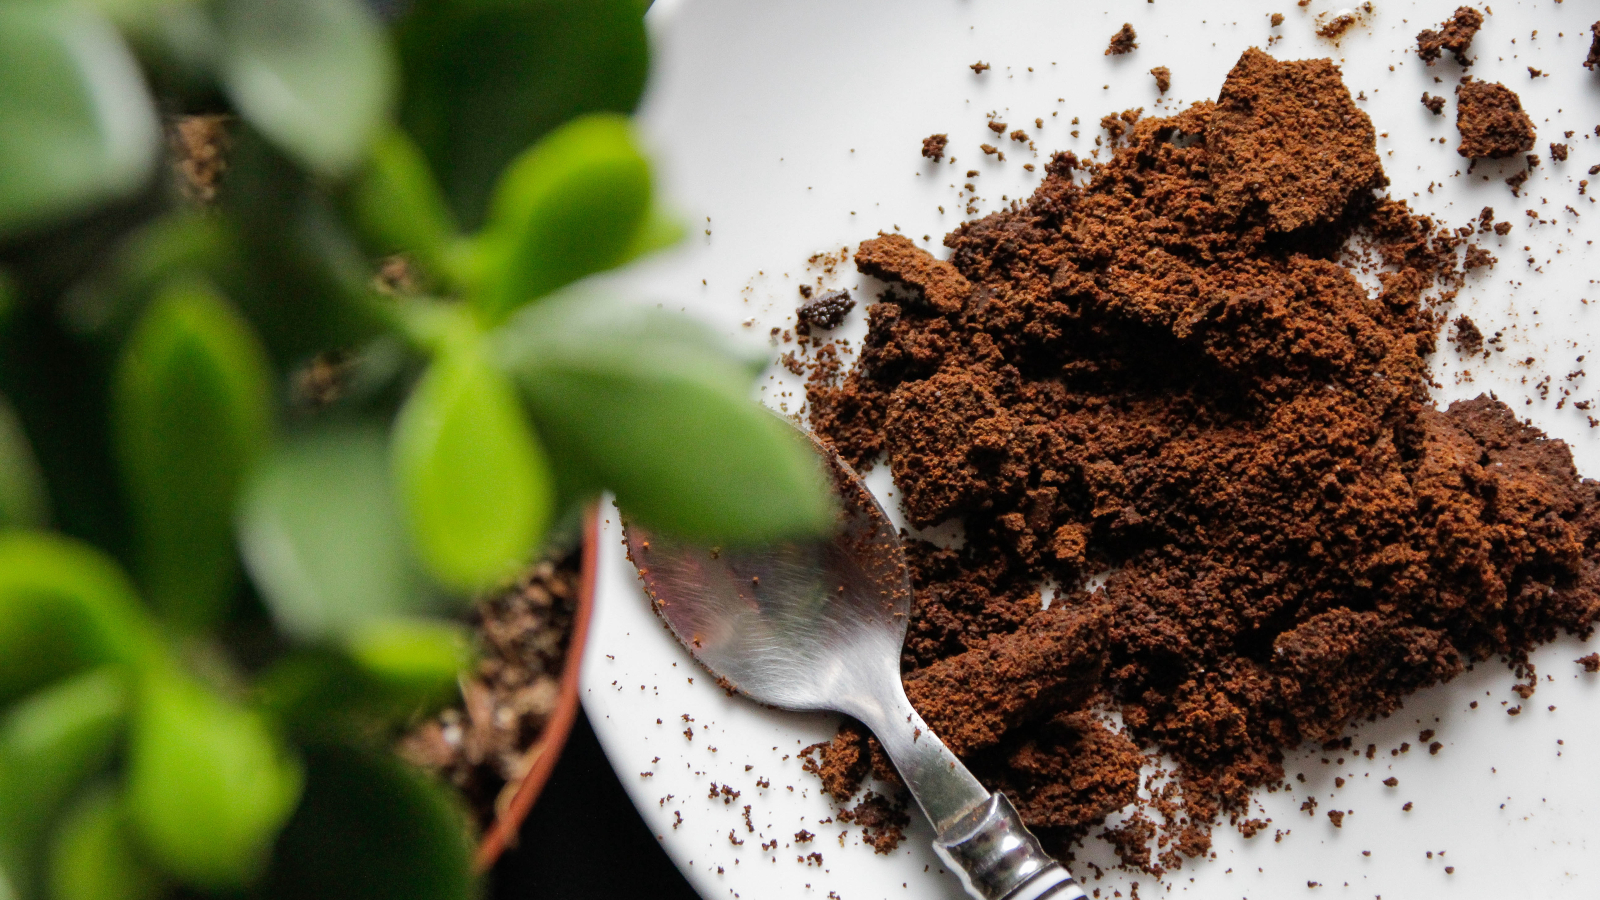 Adding coffee grounds directly to the soil